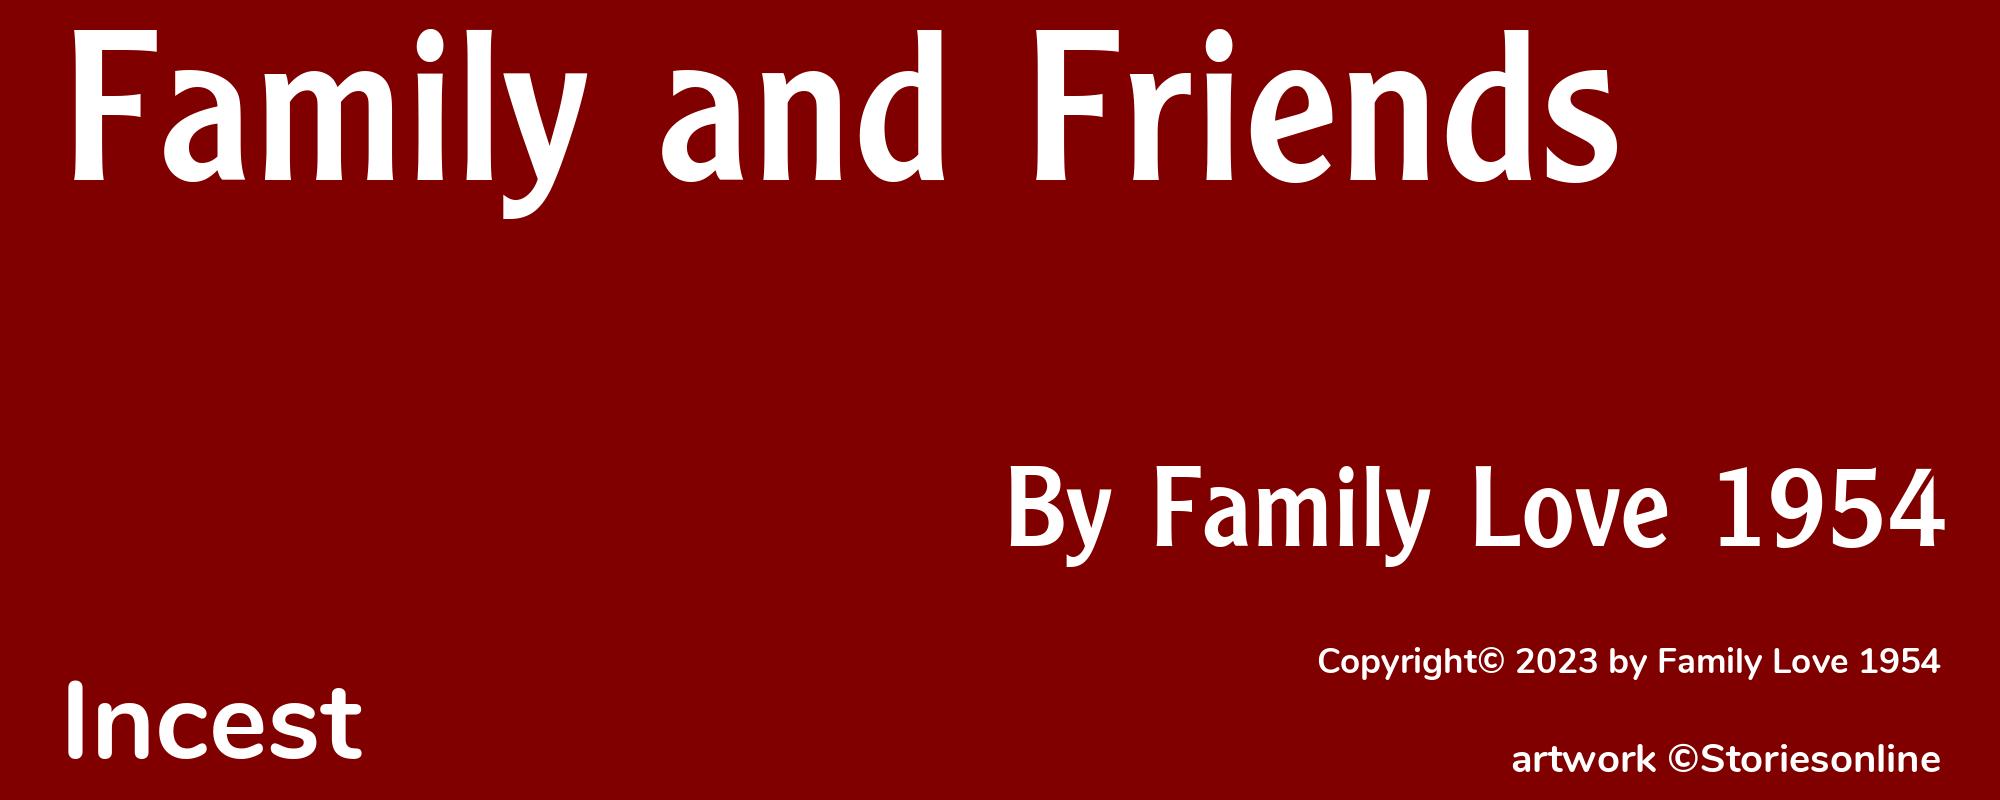 Family and Friends - Cover